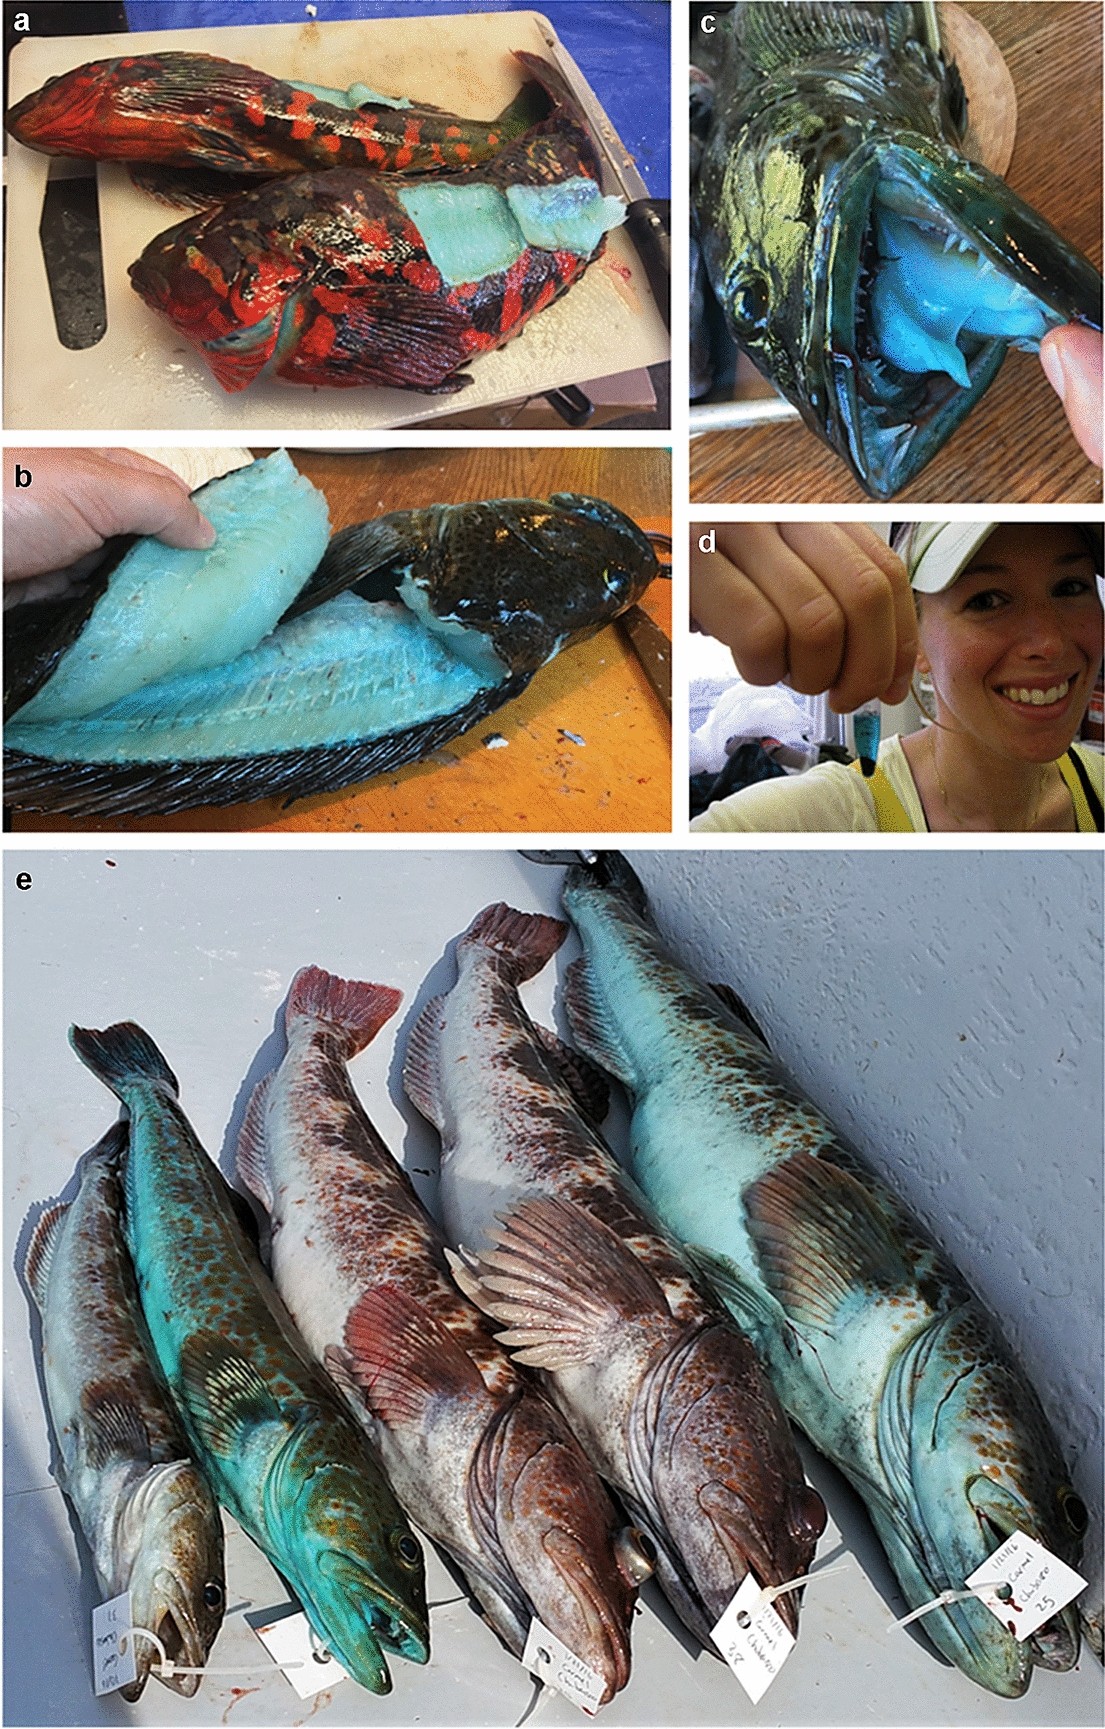 Assessing prevalence and correlates of blue-colored flesh in lingcod